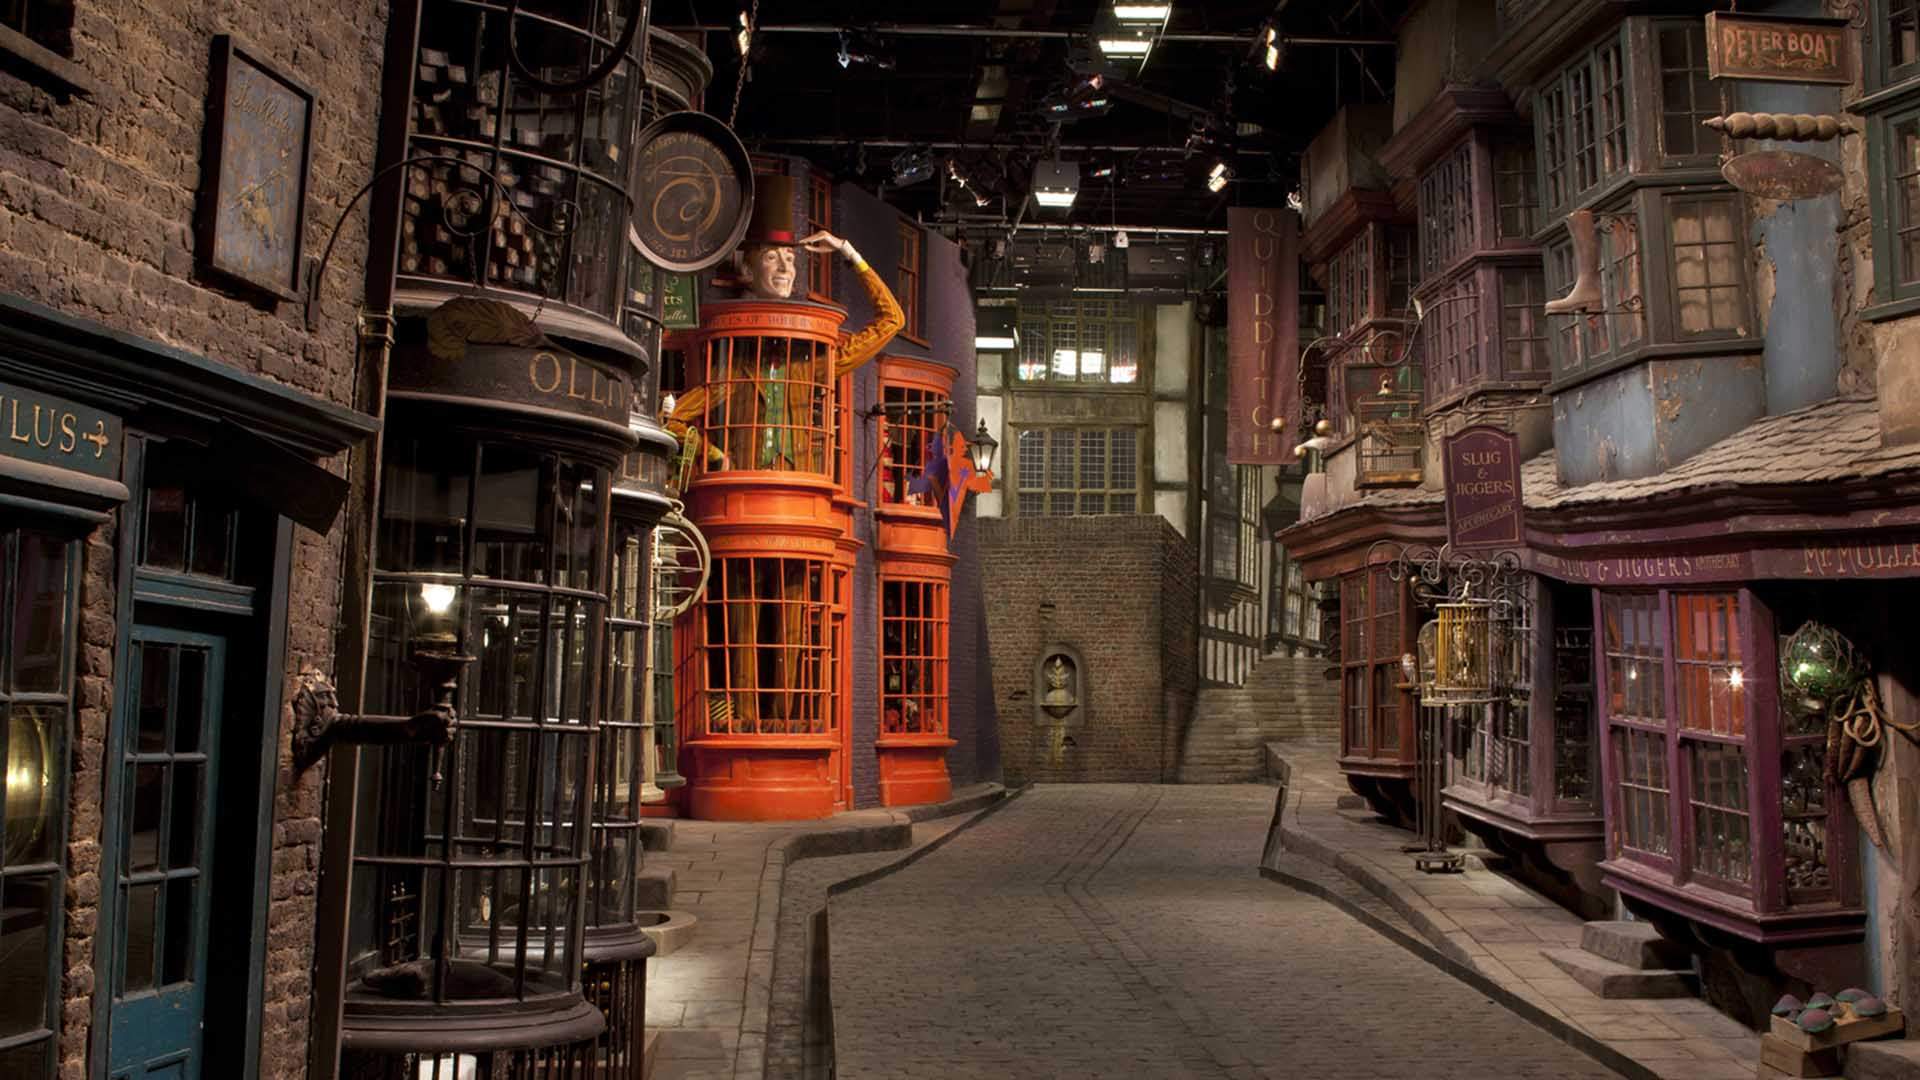 Japan's New 'Making of Harry Potter' Theme Park Will Open in 2023